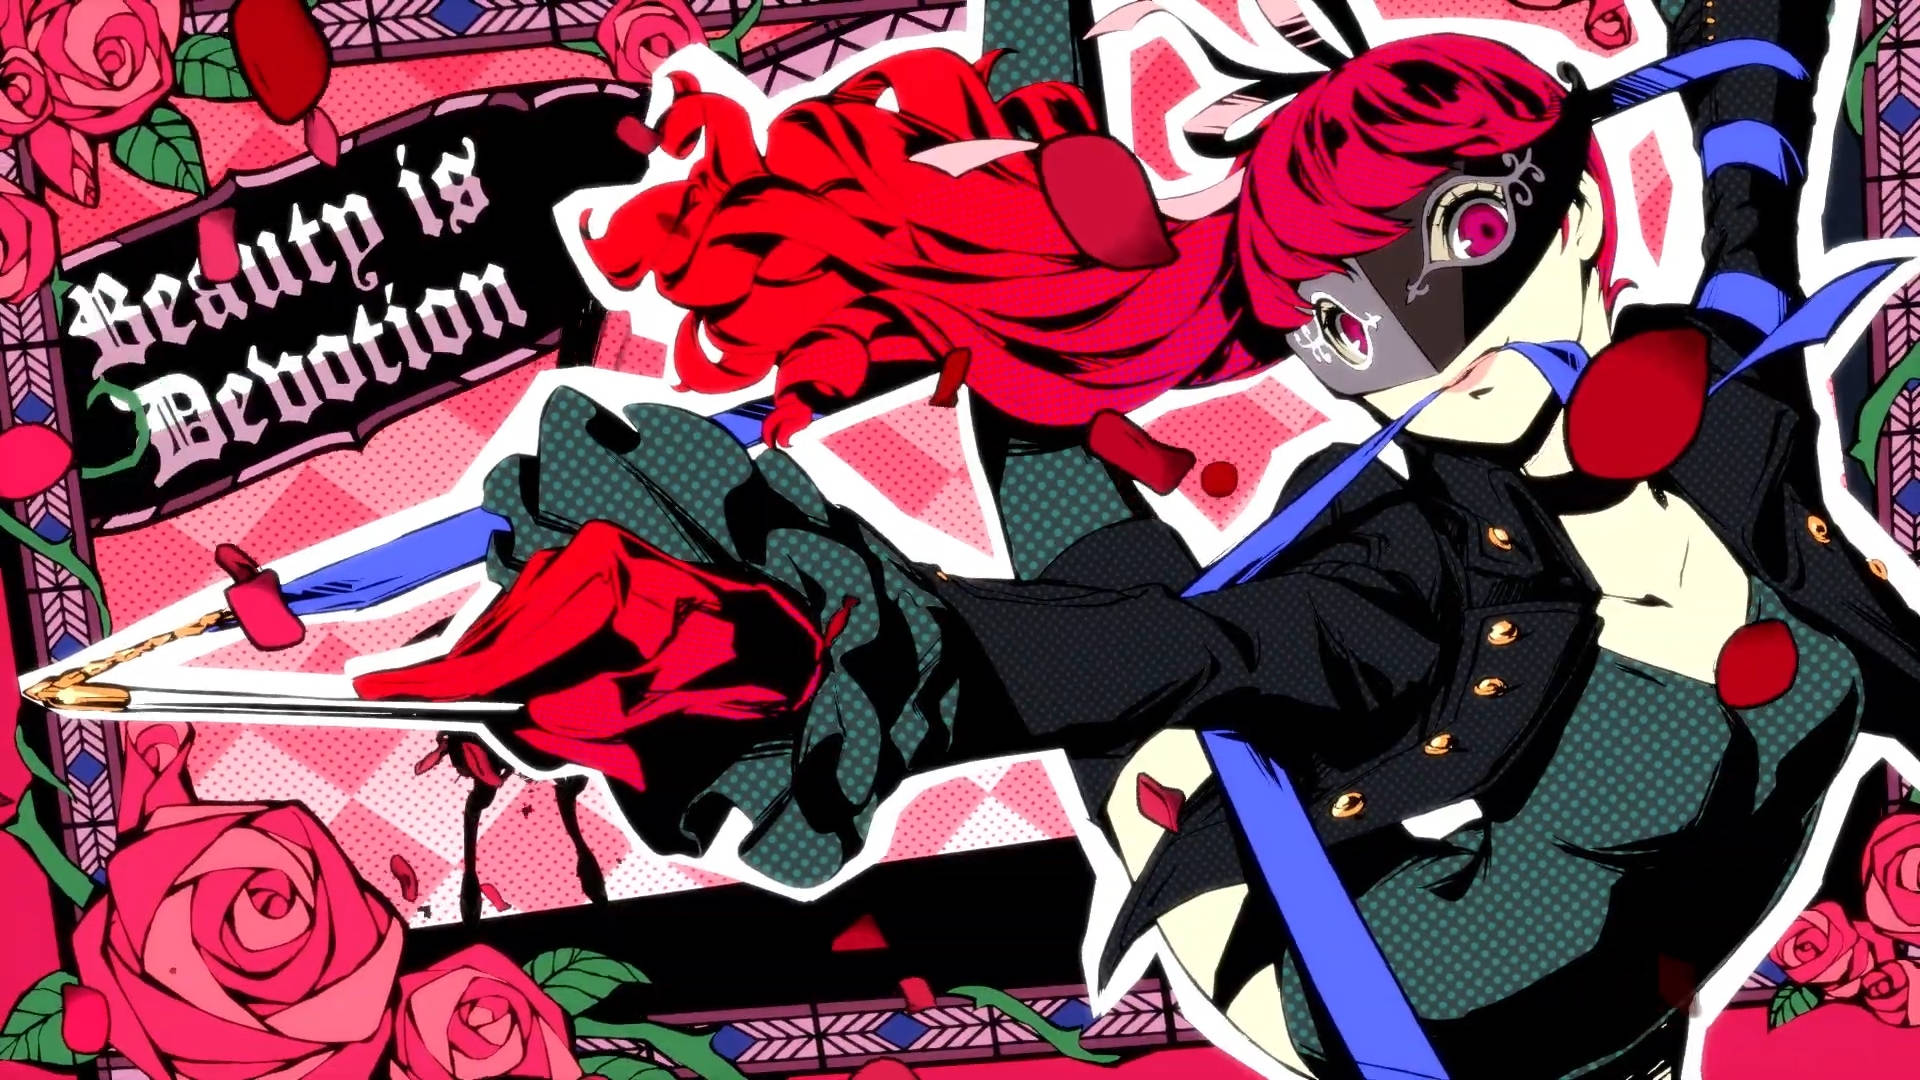 Persona 5 Royal Sumire Pink Flower Wallpaper